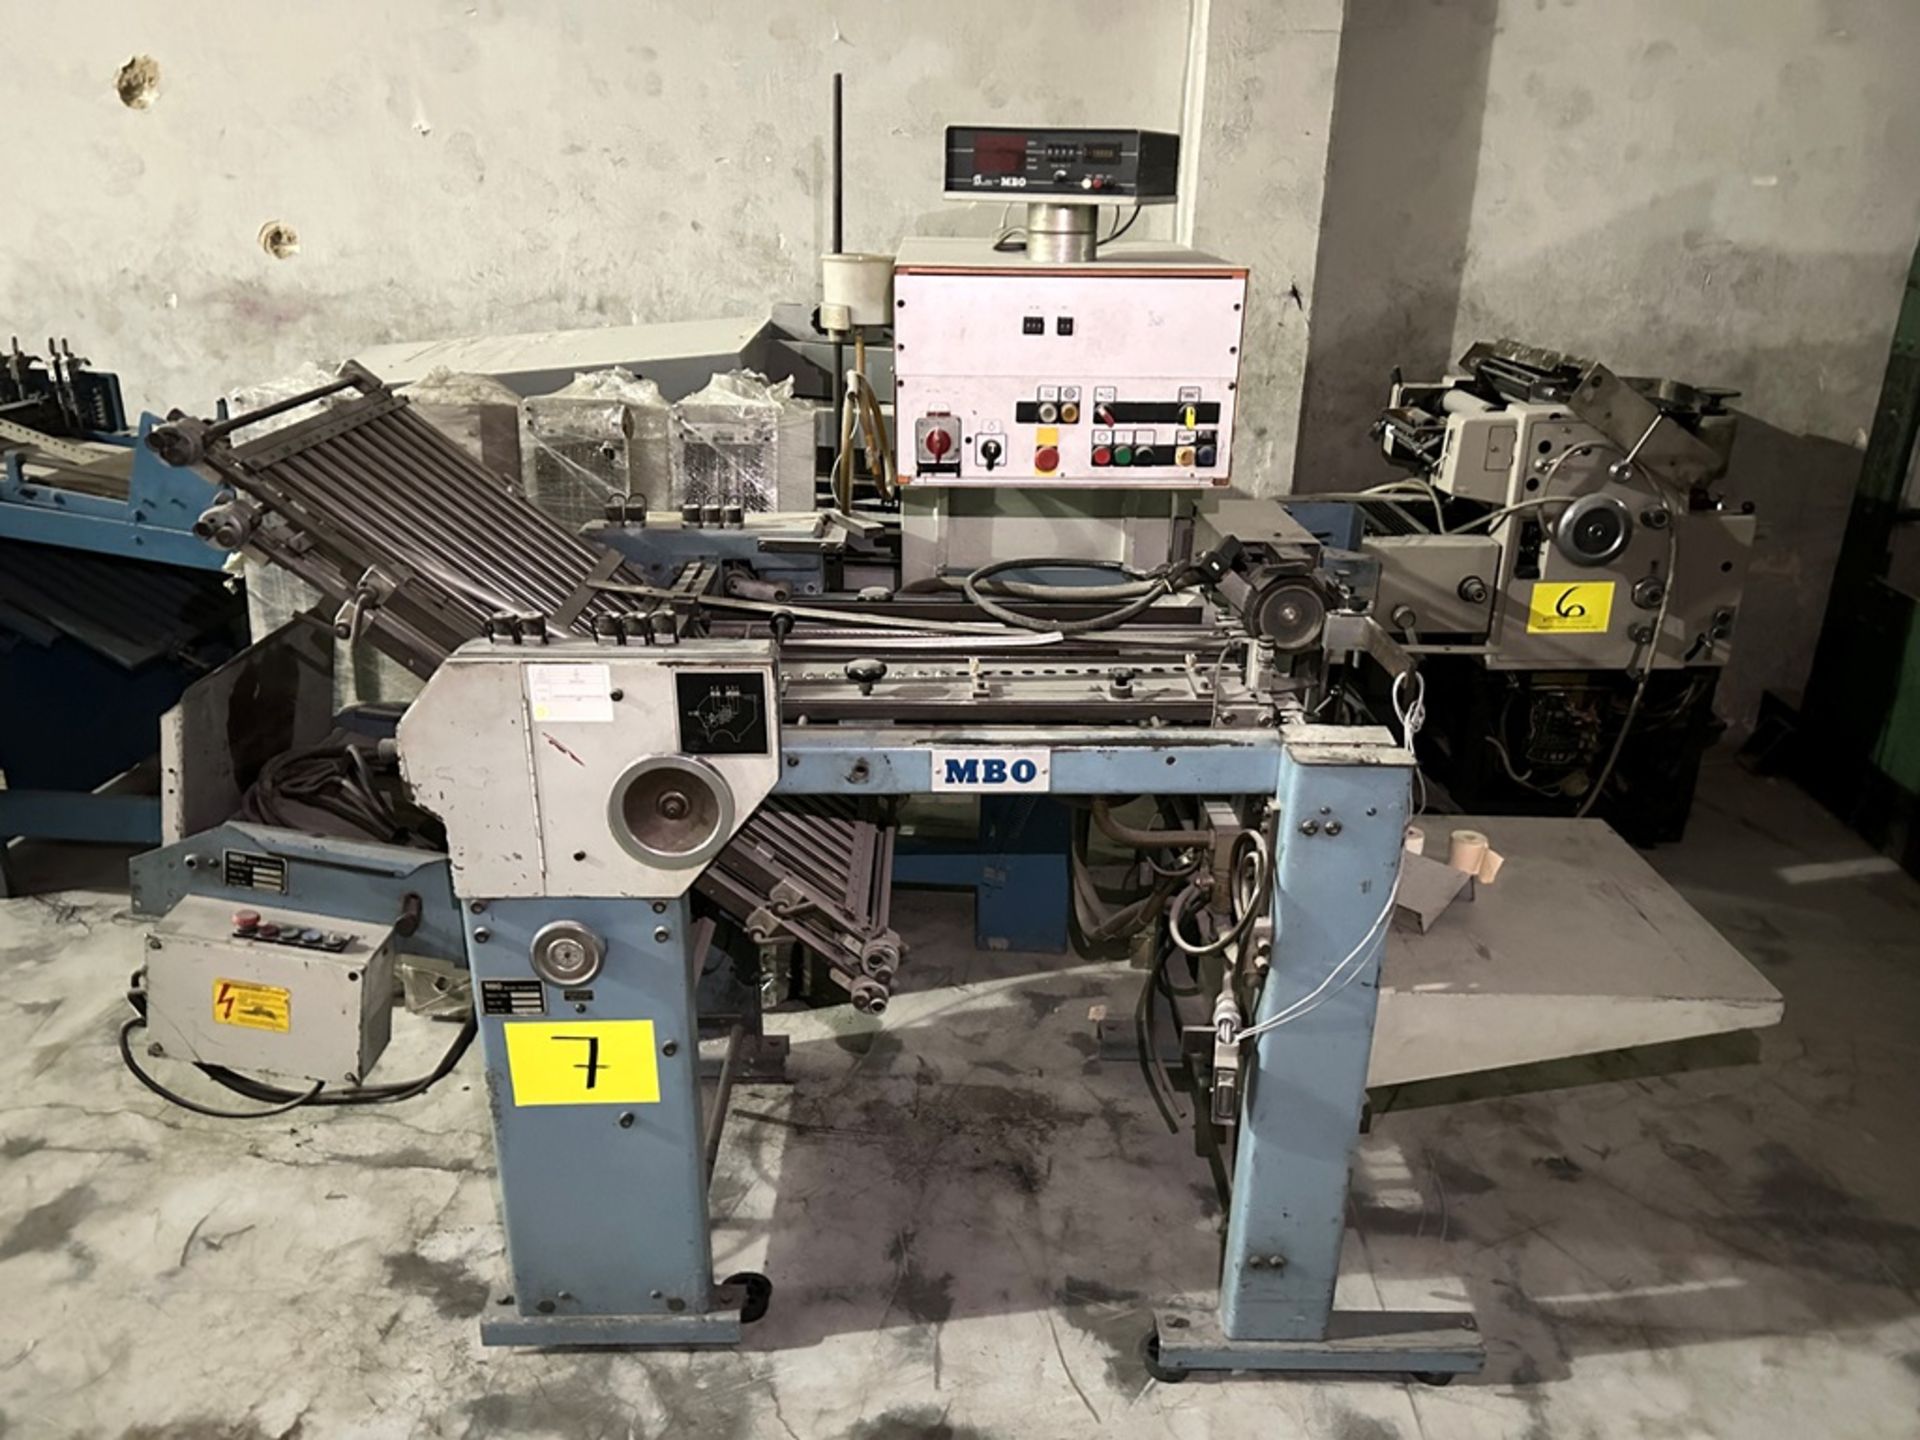 MBO 750 x 520 mm format folding machine, Model T52, Serial No. 890911935, Year 1984, 220V, 4 folds, - Image 5 of 9